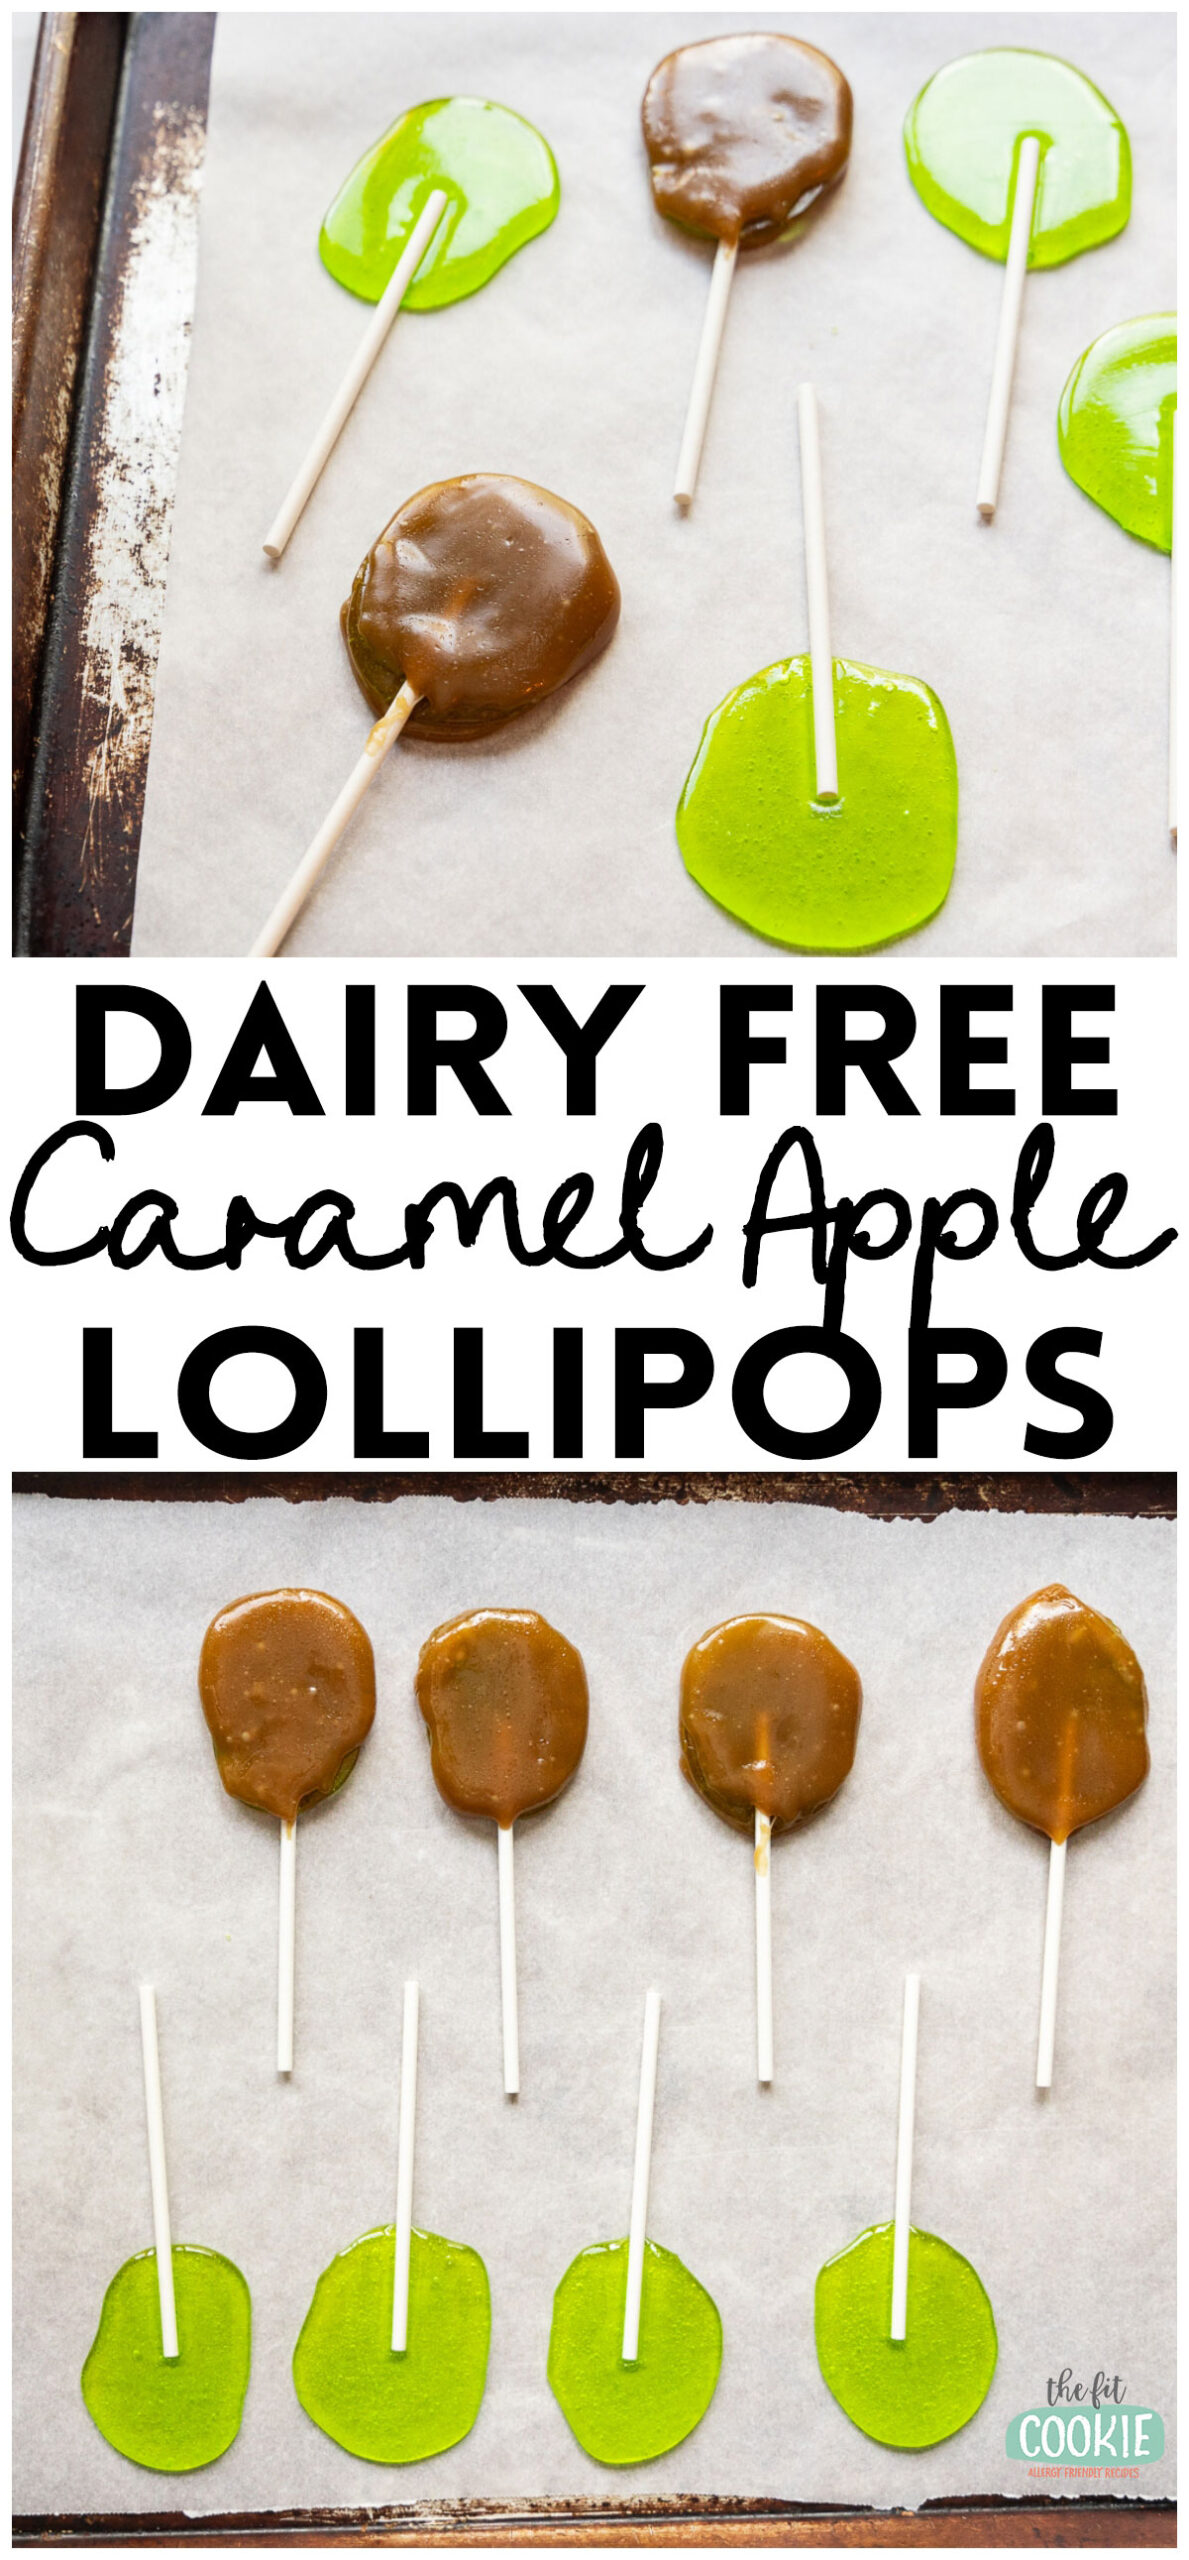 Photo collage showing different photos of dairy free caramel apple pops.